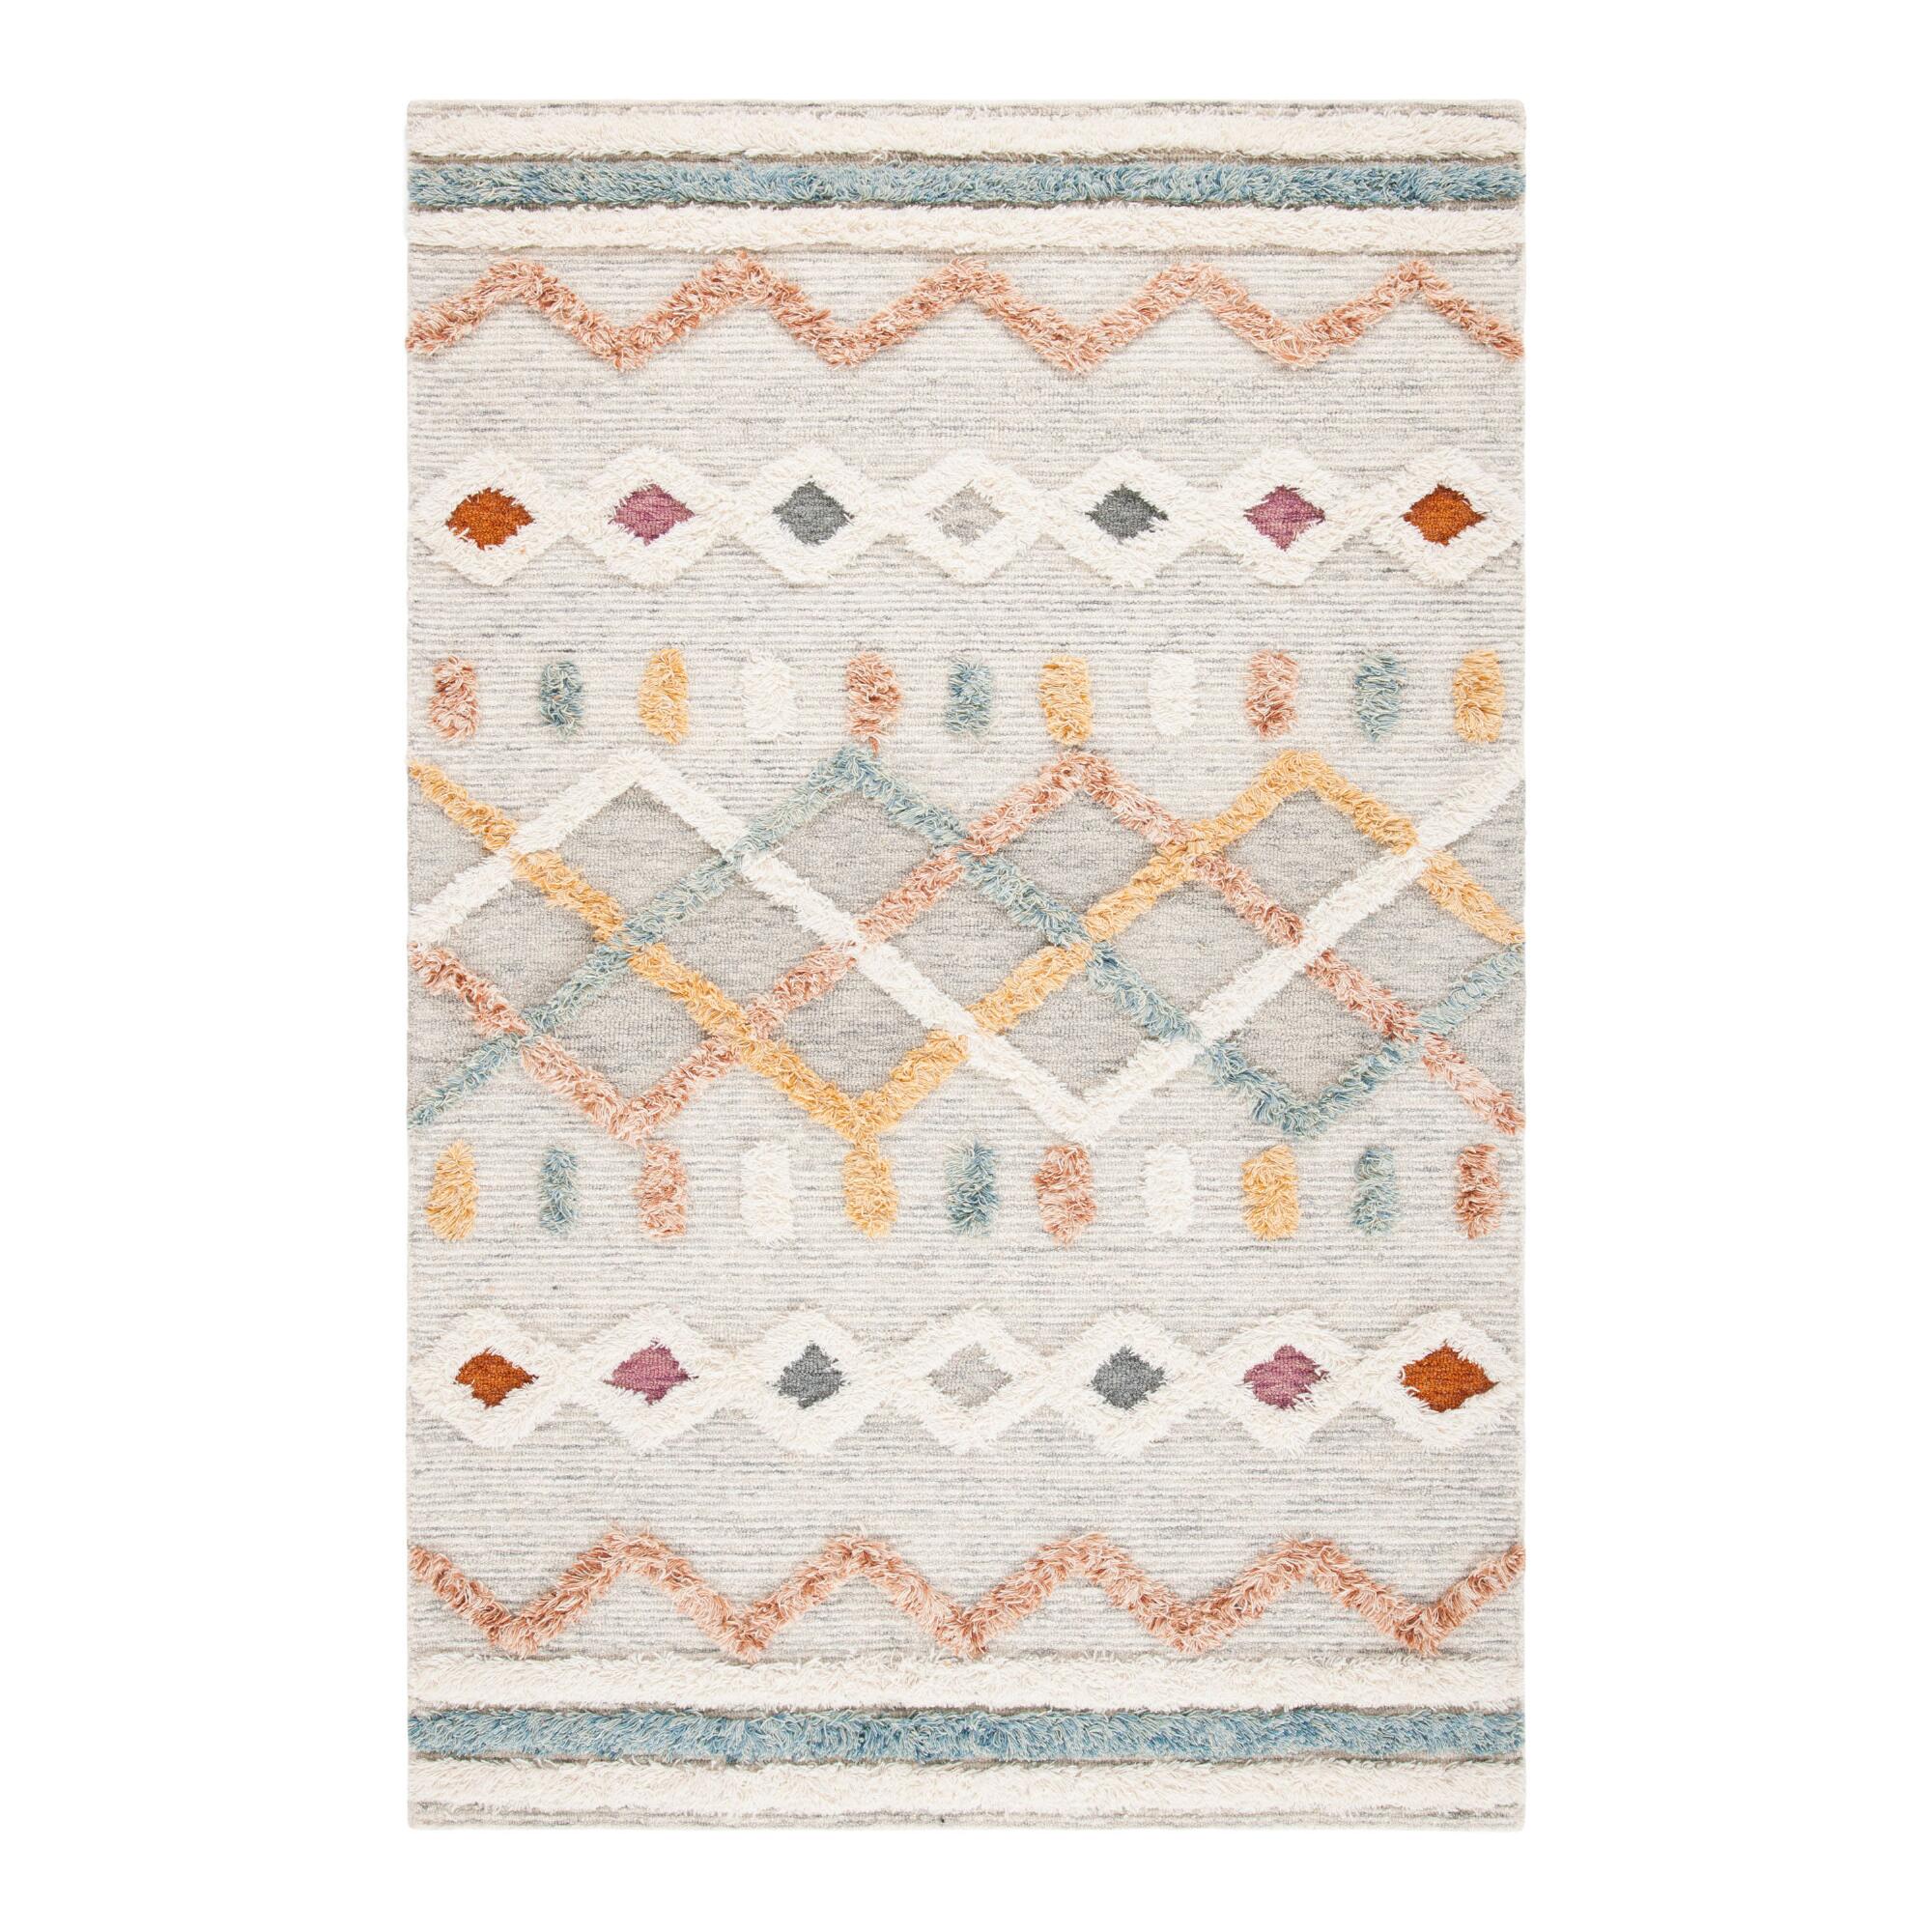 Ivory and Blue Geometric Hand Knotted Wool Logan Area Rug: Multi - 8' x 10' by World Market